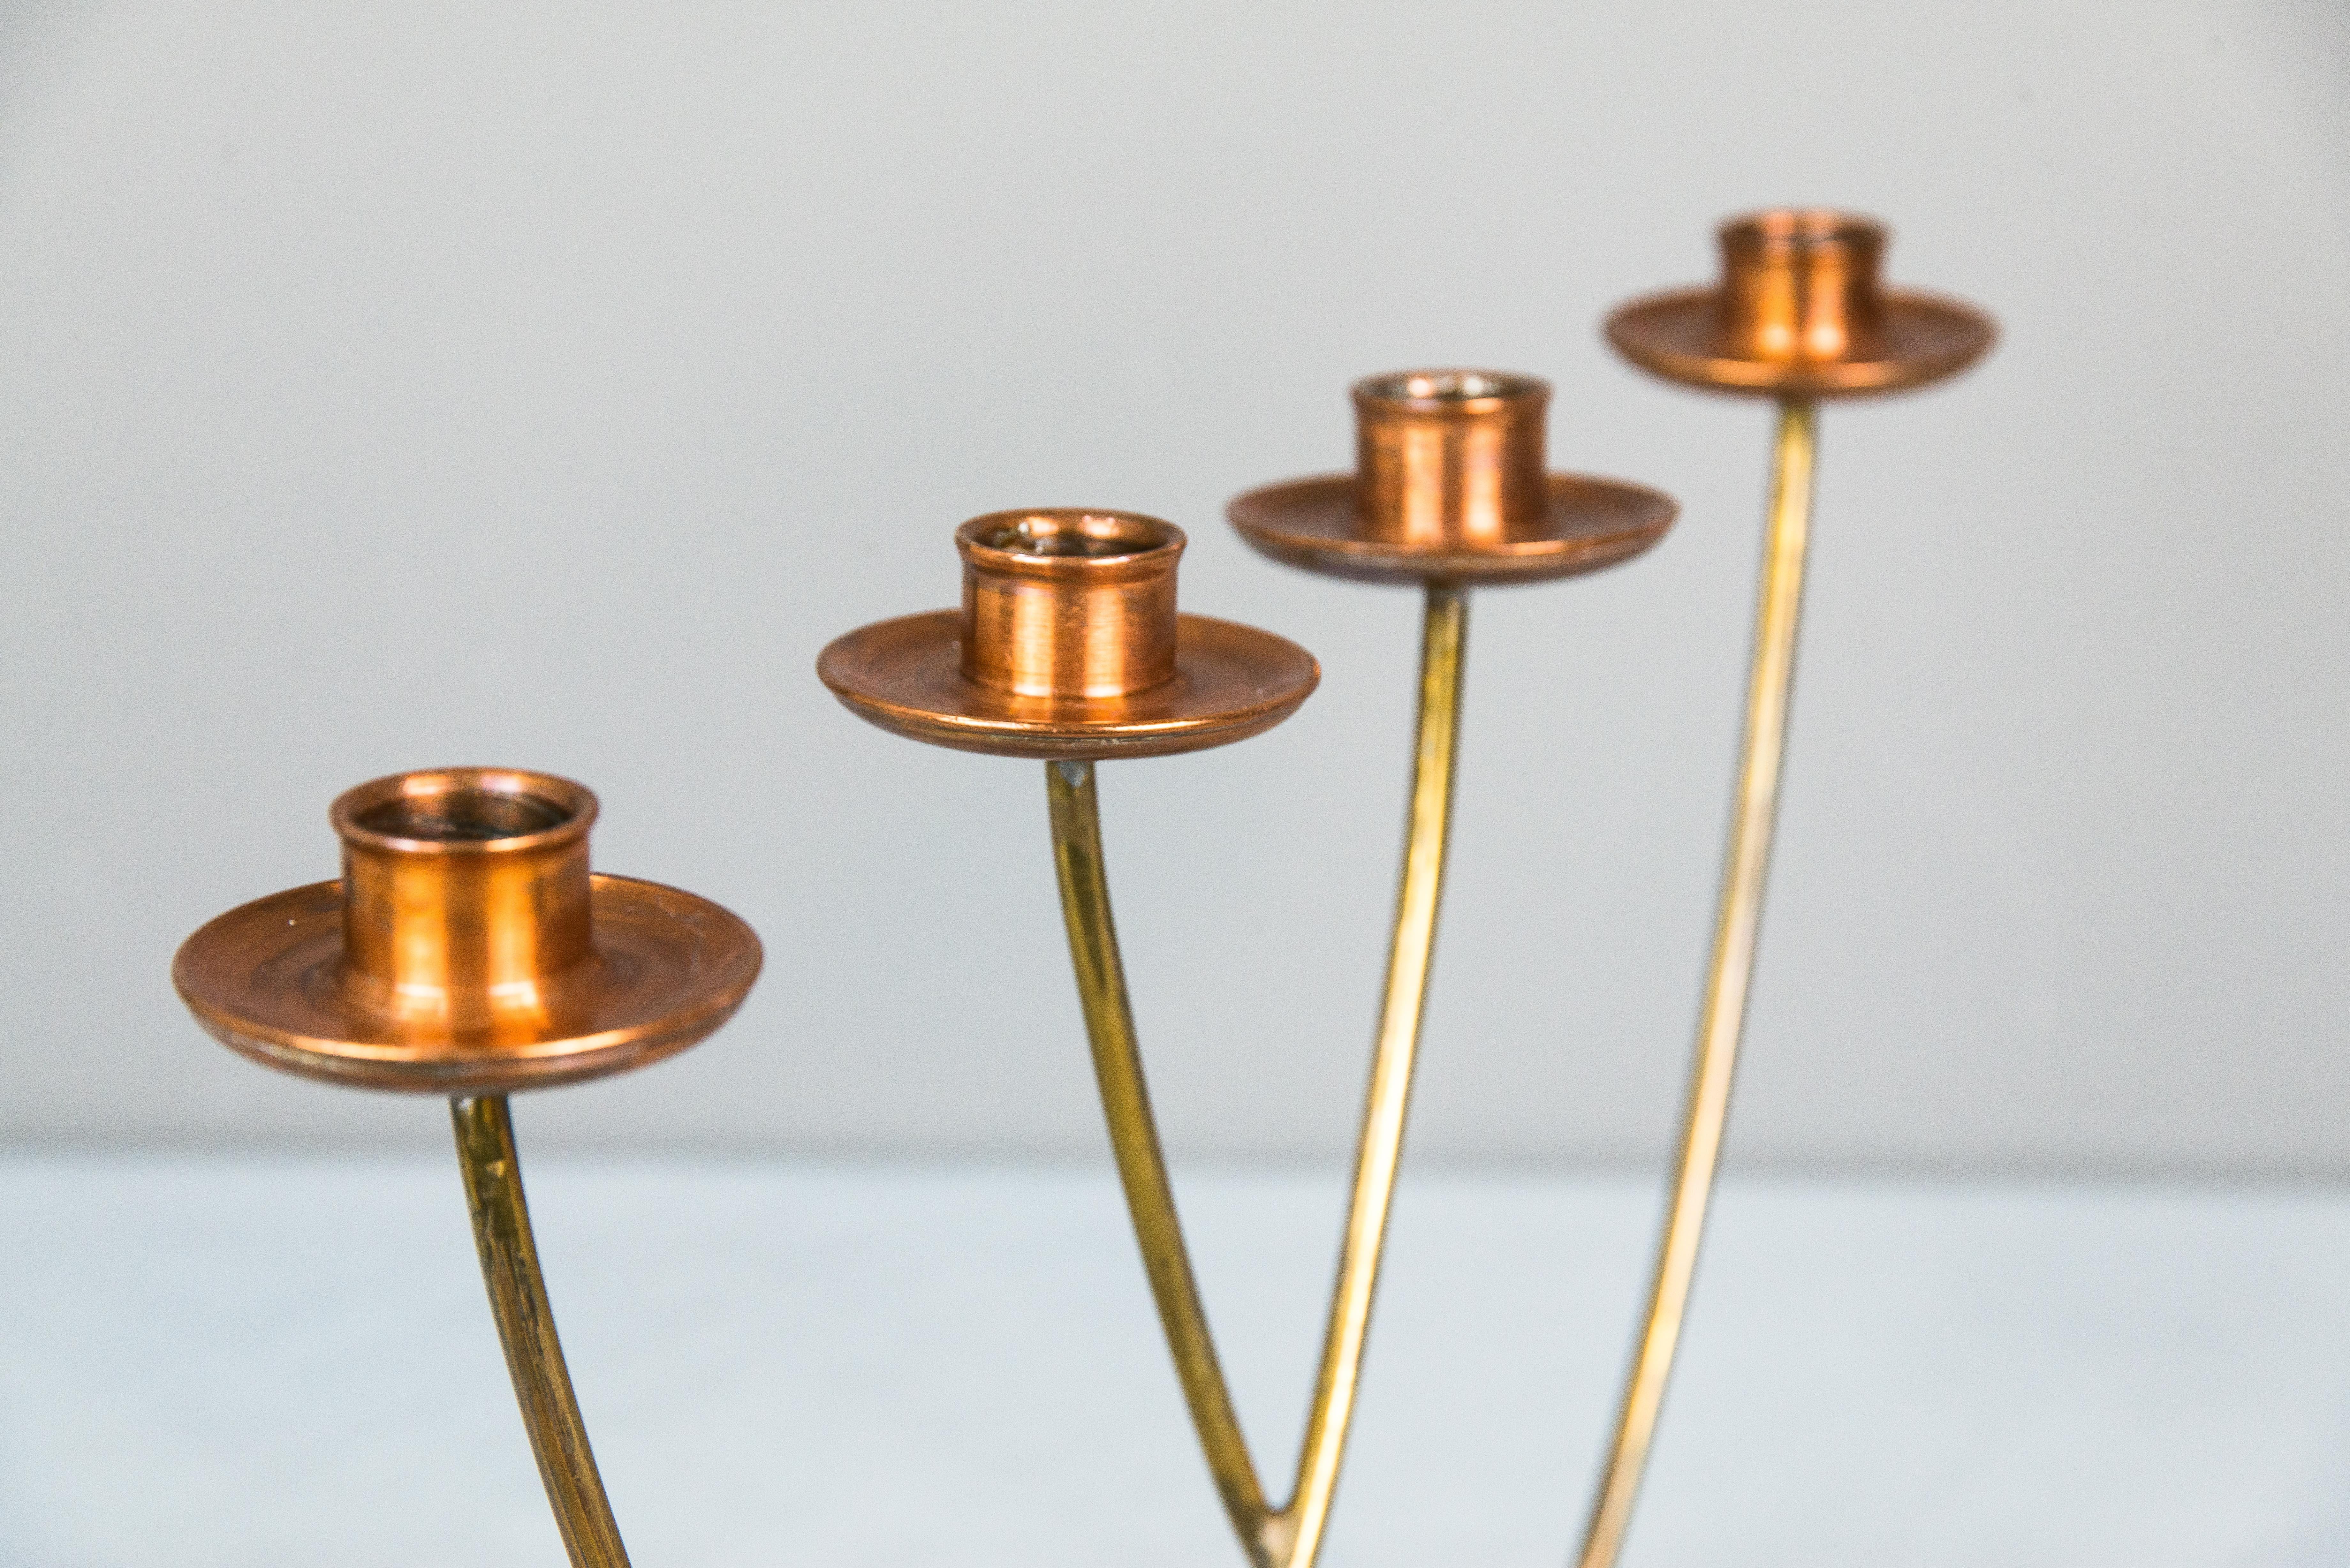 Candleholder for 4 Candles Execution in Copper and Brass, circa 1950s For Sale 3